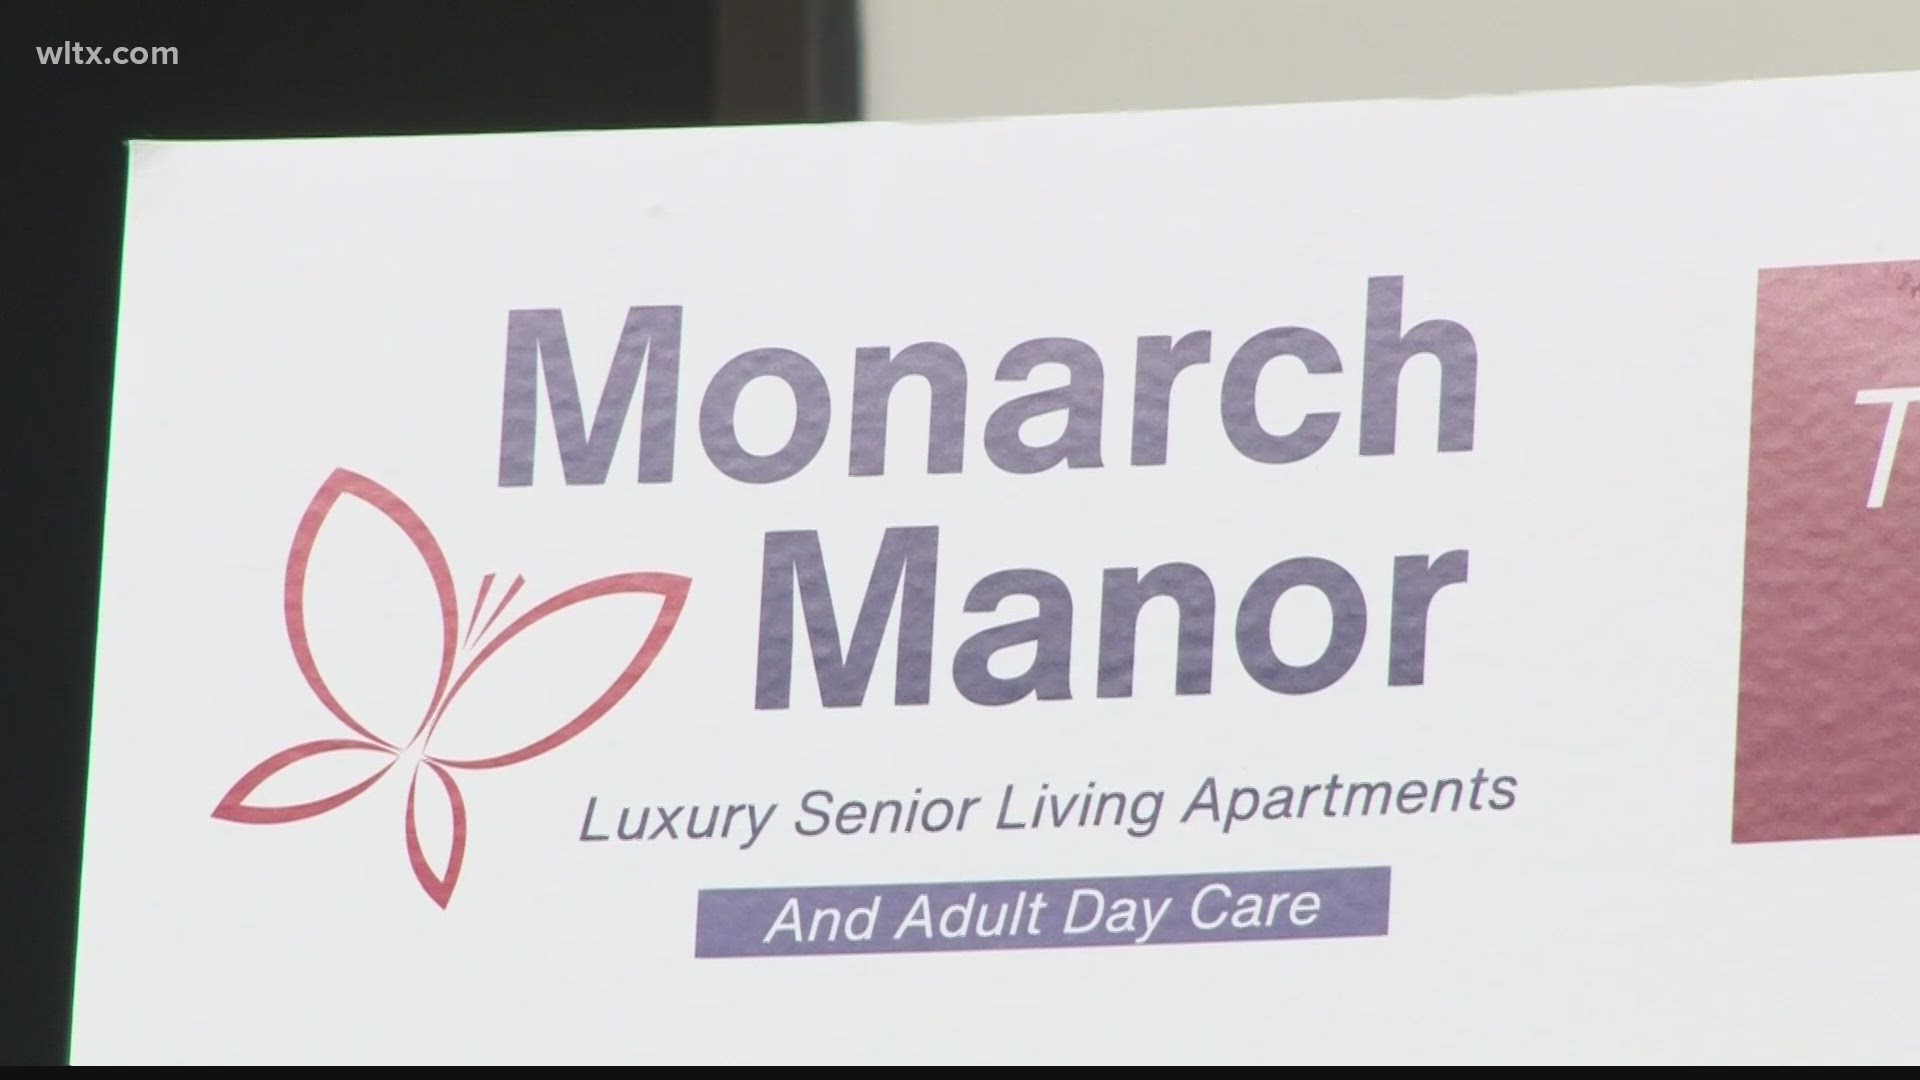 Monarch Manor is a new project in the works through Midlands Housing Alliance, that will aim to provide permanent housing for seniors.